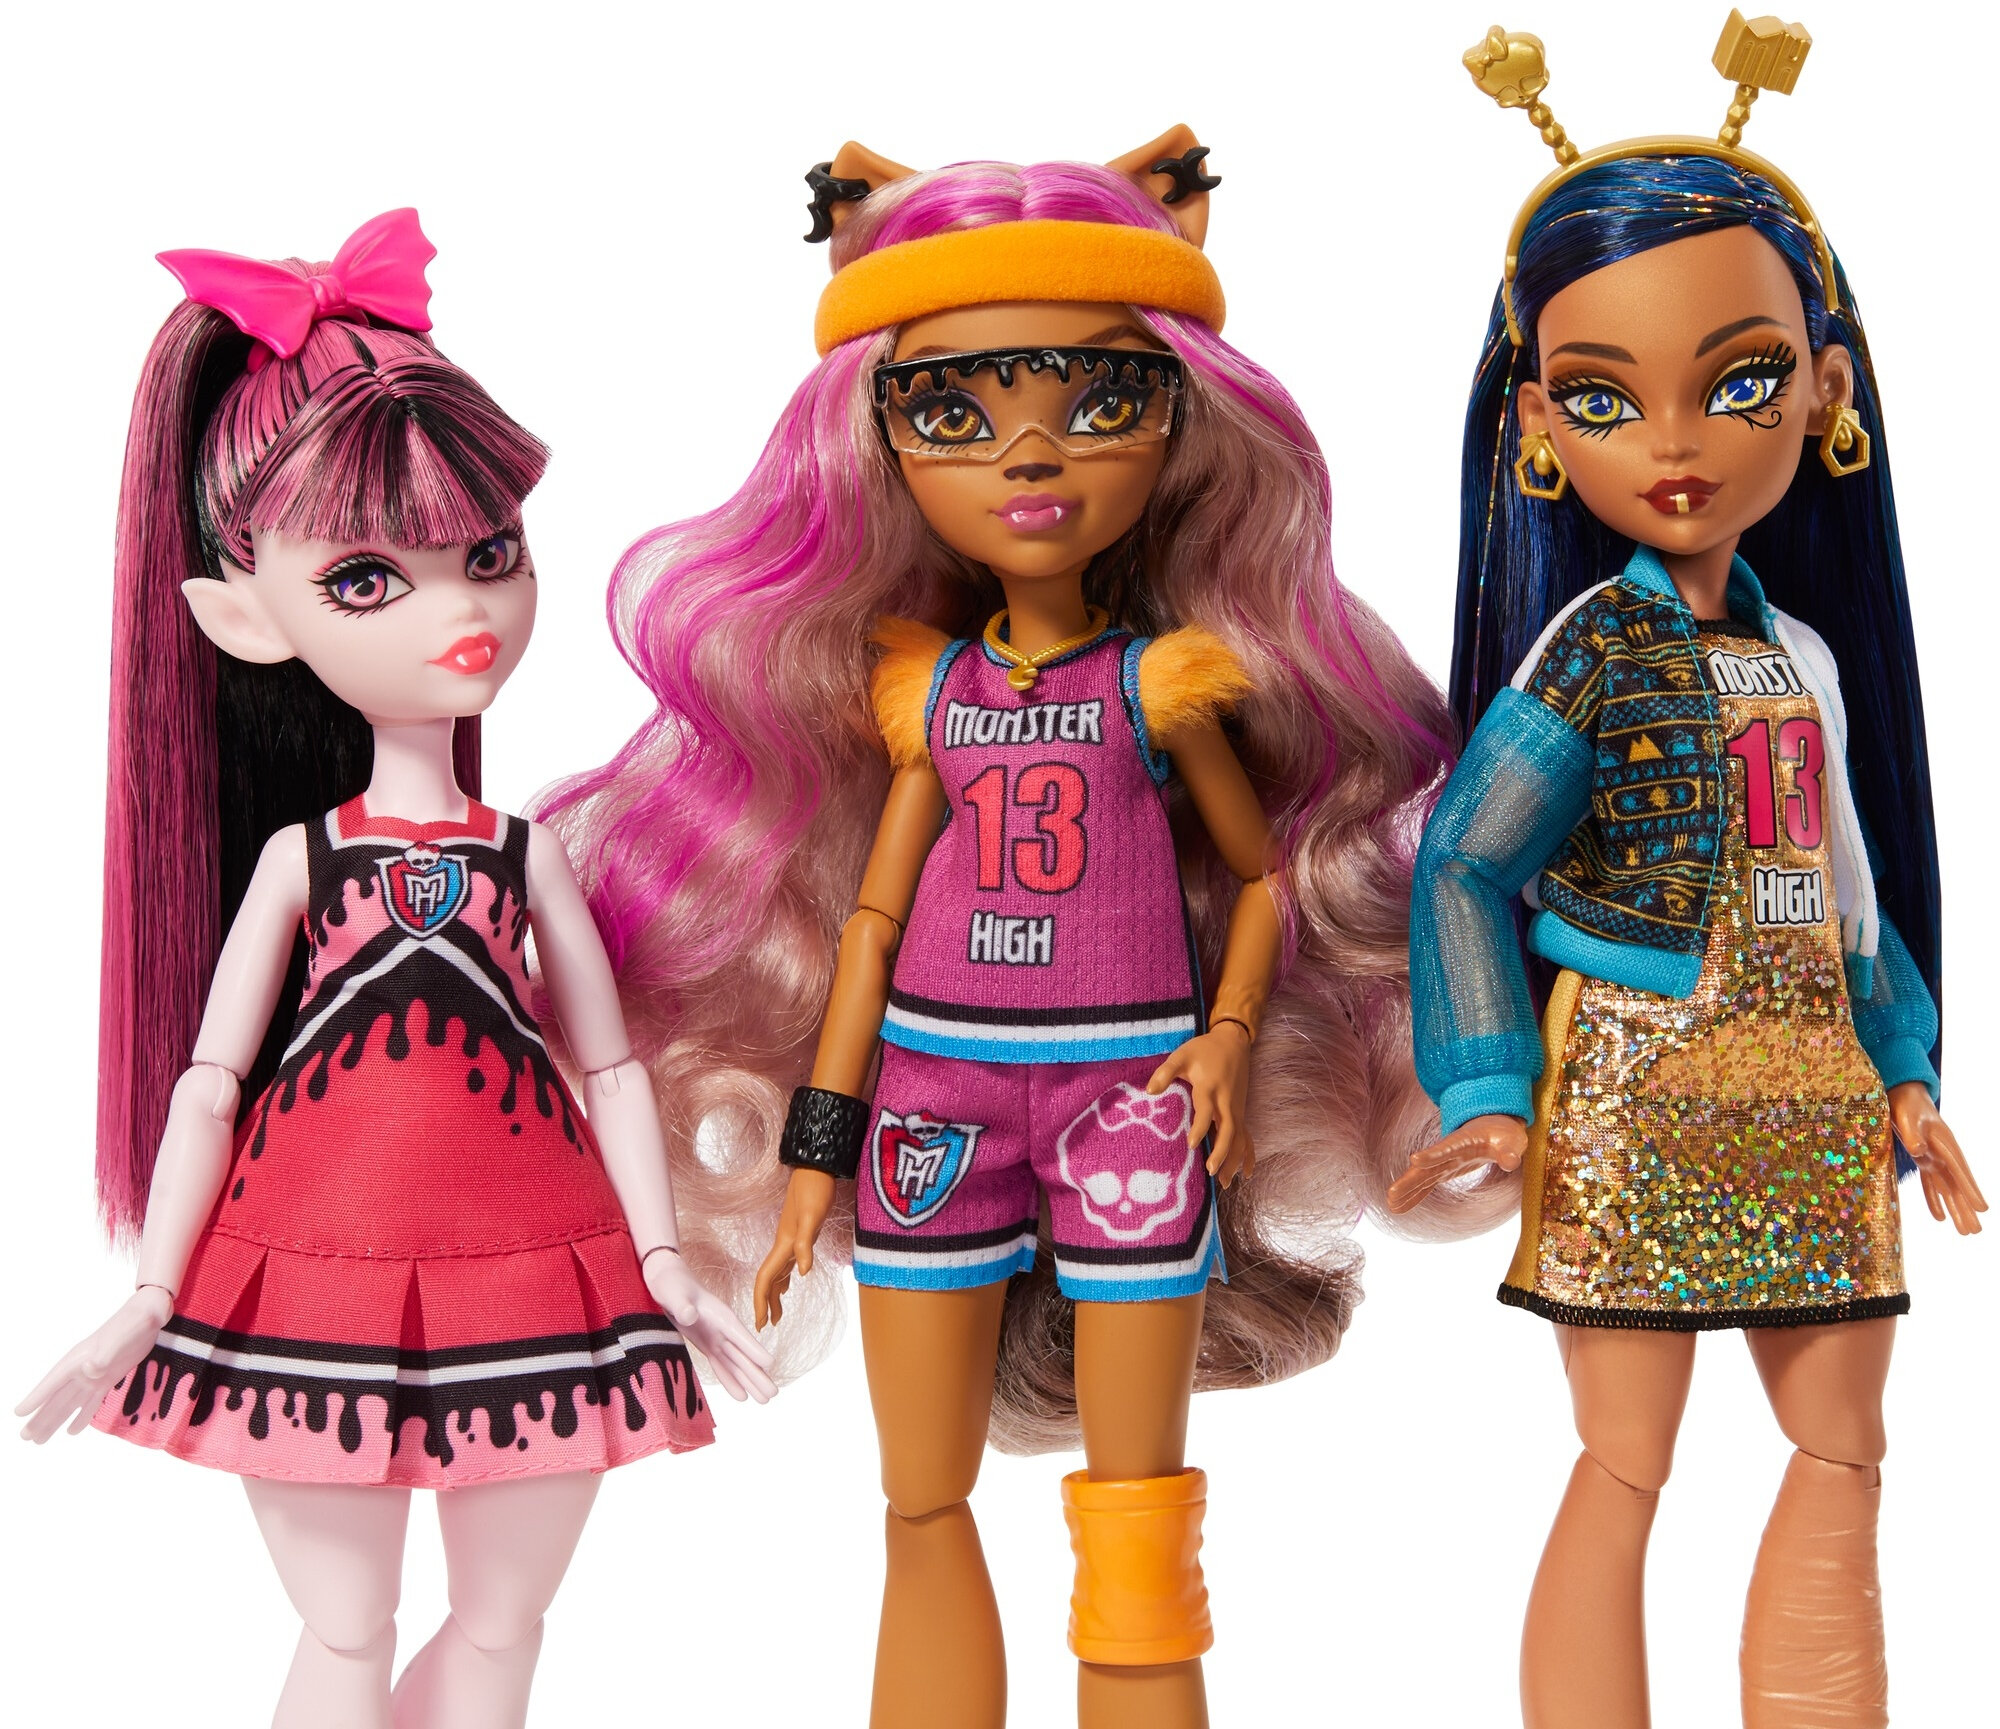 Monster High Ghoul Spirit Doll 6-Pack, Sport Theme, Collectible Set with Draculaura & 5 Other Dolls - image 3 of 6